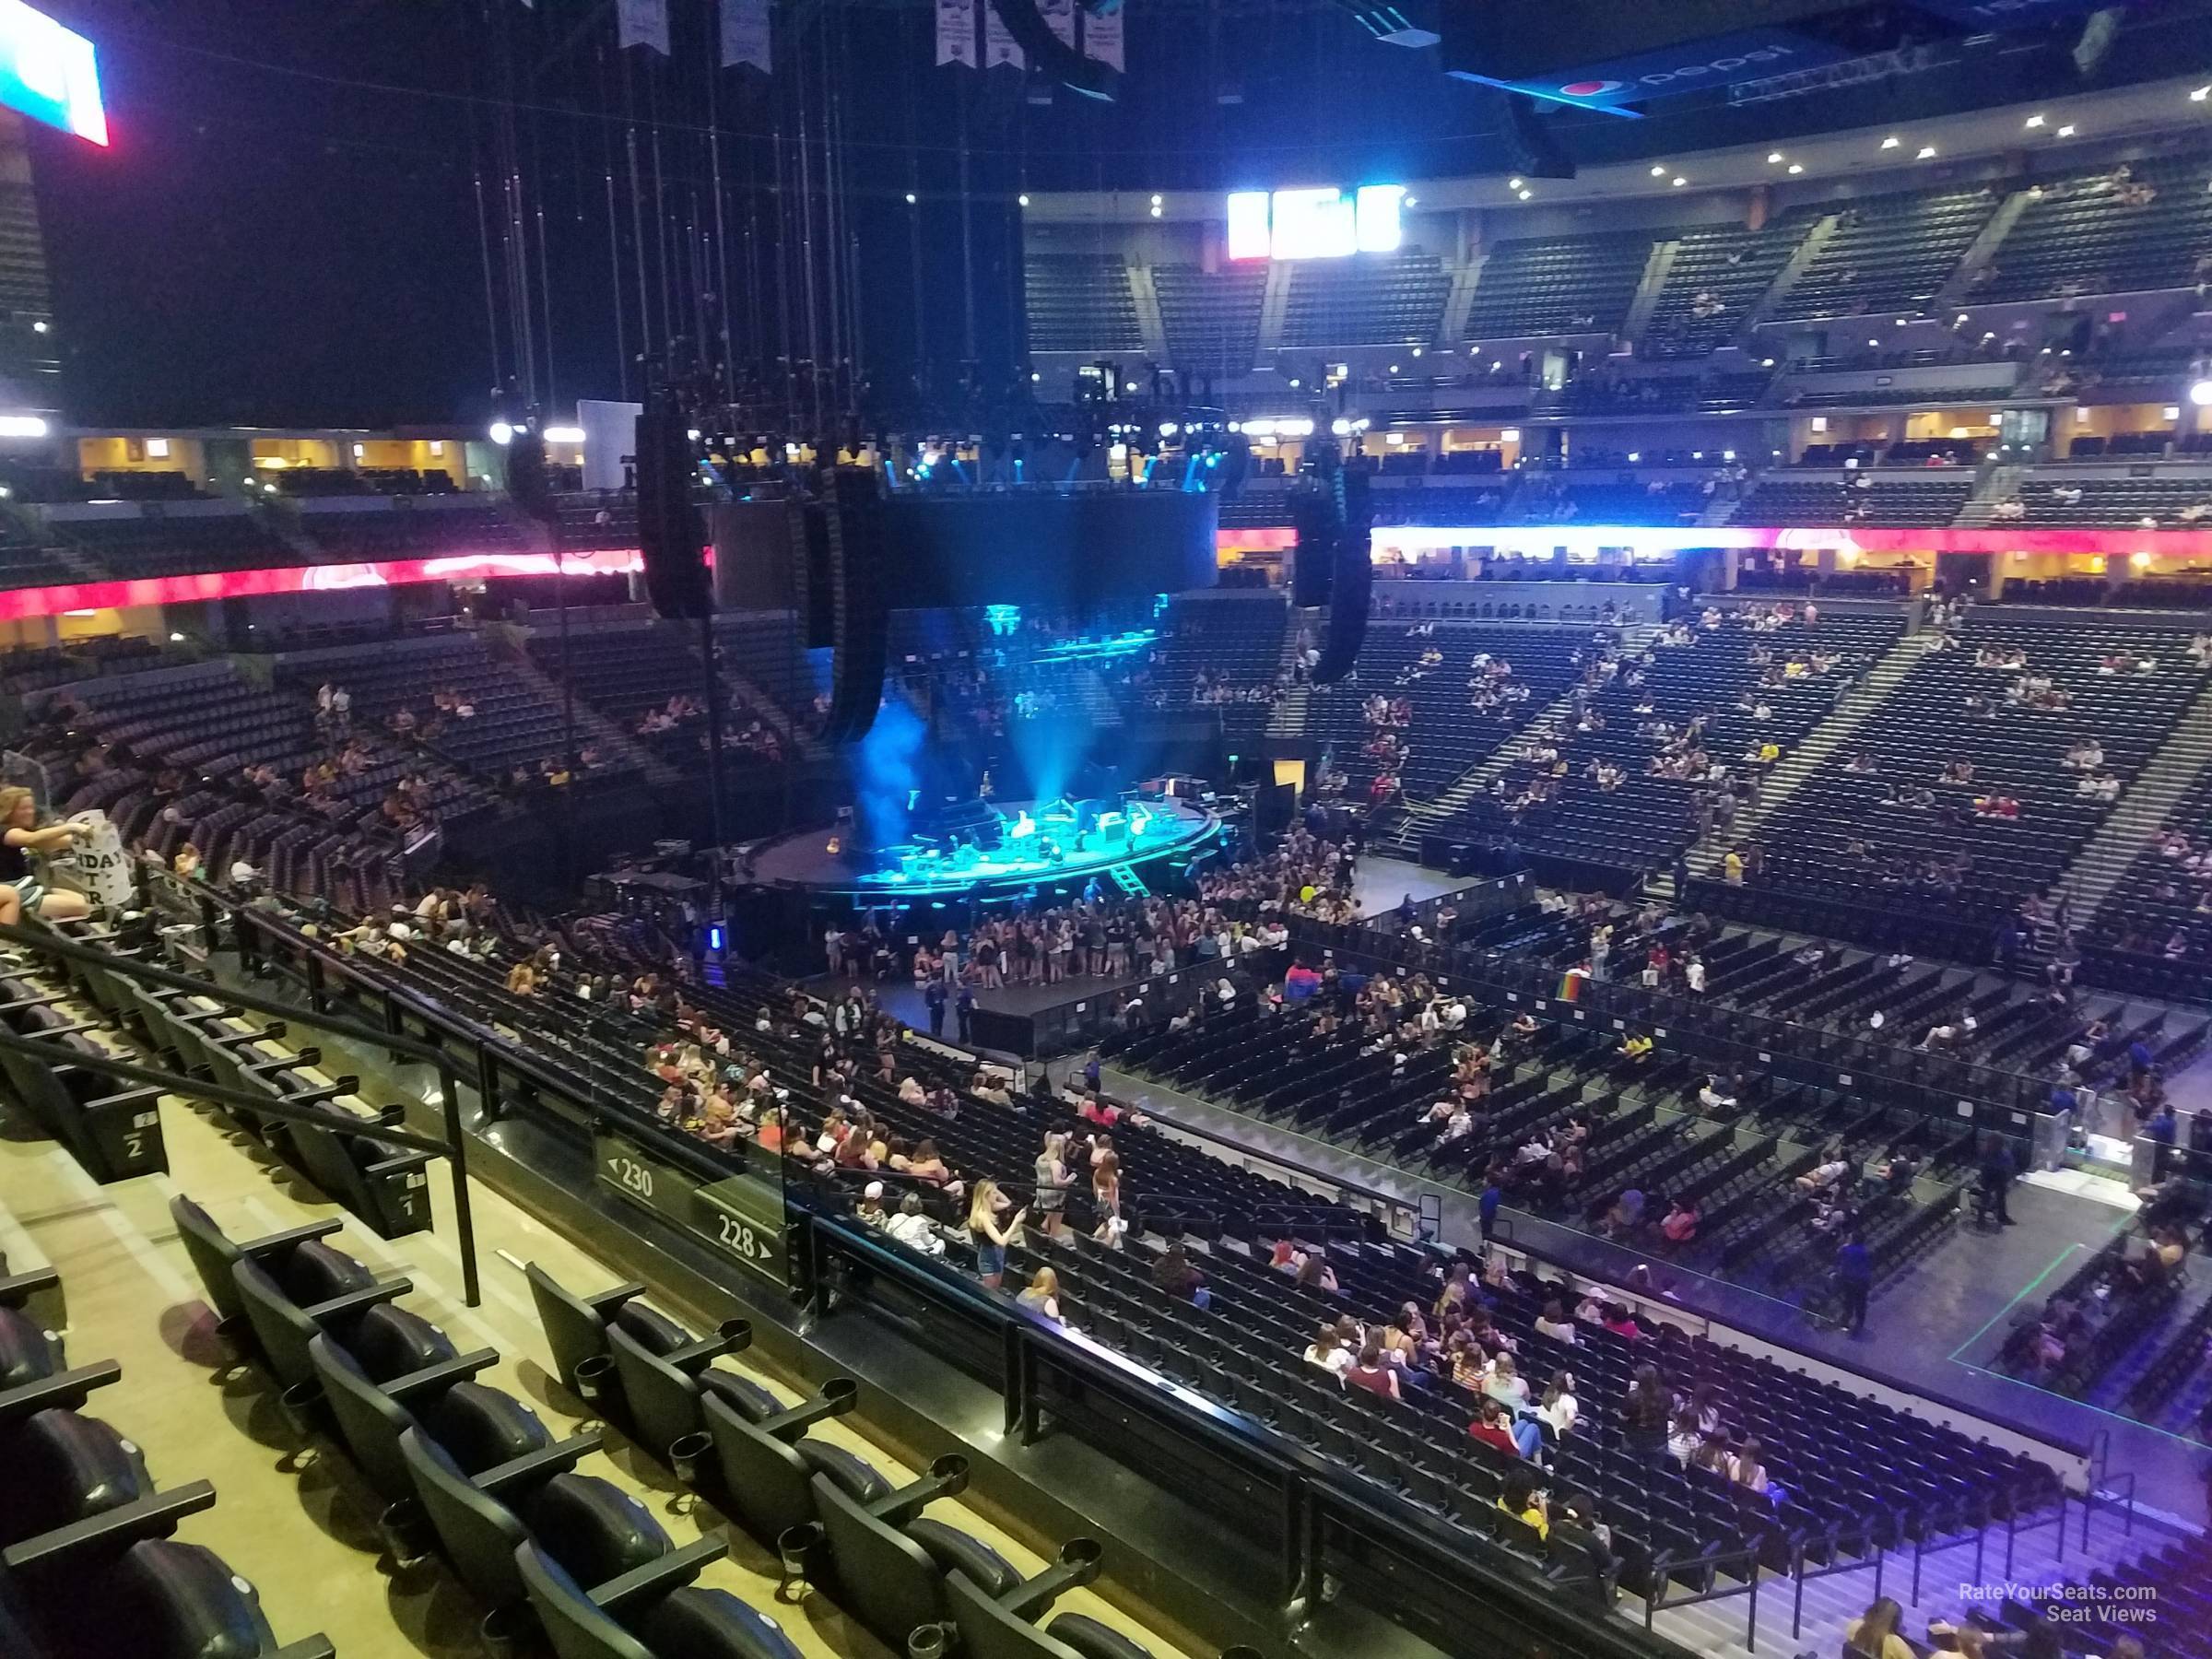 section 228, row 4 seat view  for concert - ball arena